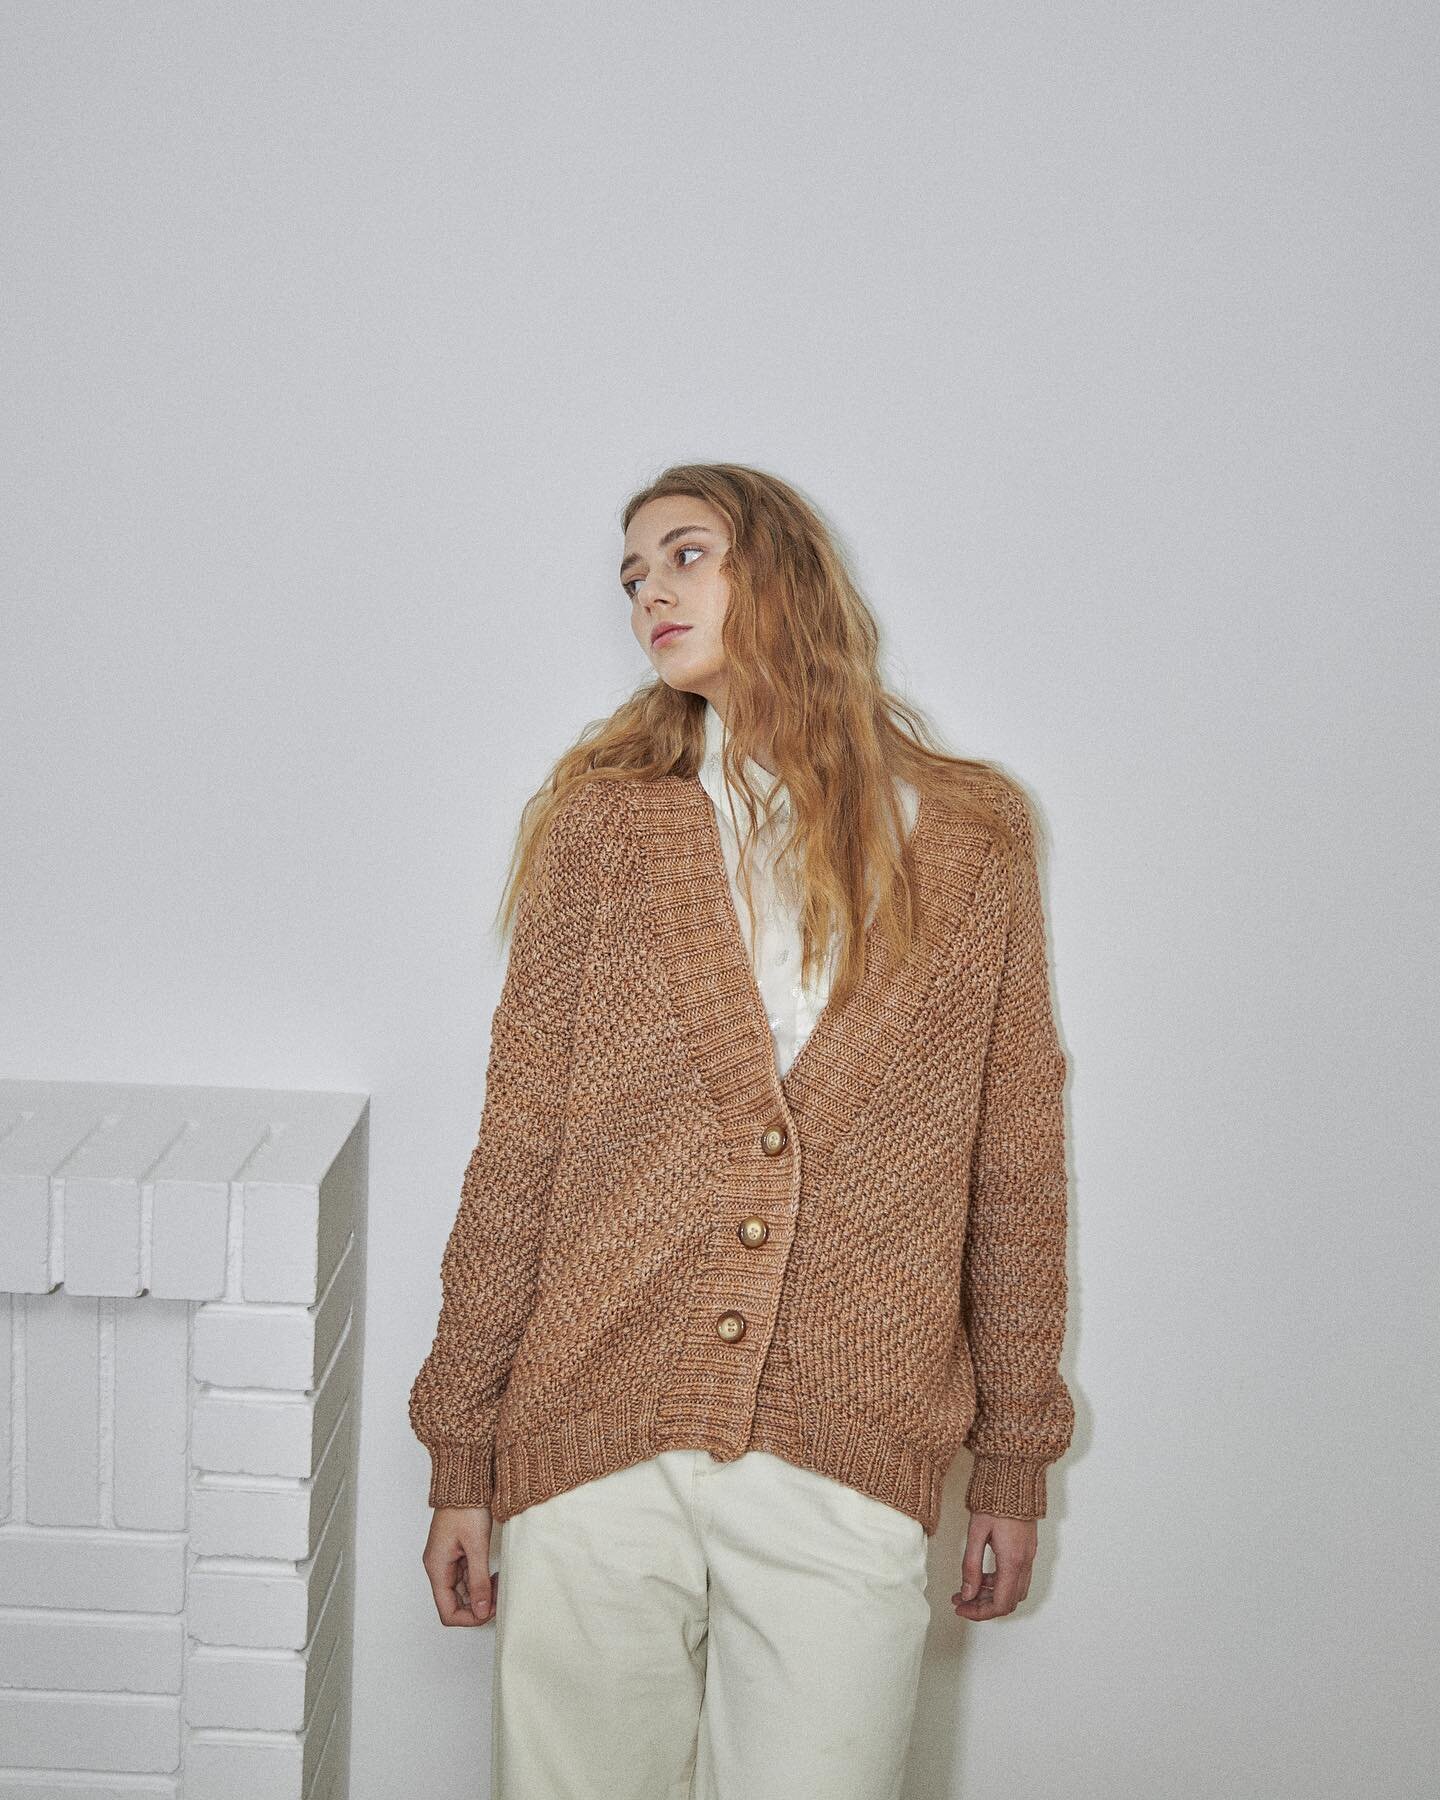 The everyday companion sweater- enjoy 30% OFF on The Morning Coffee Cardigan 

Handknitted in the softest and silly merino wool.

Use code: WARMEST at checkout + free worldwide shipping. 

Offer ends on December 31st, 2022.

Check out our highlighted